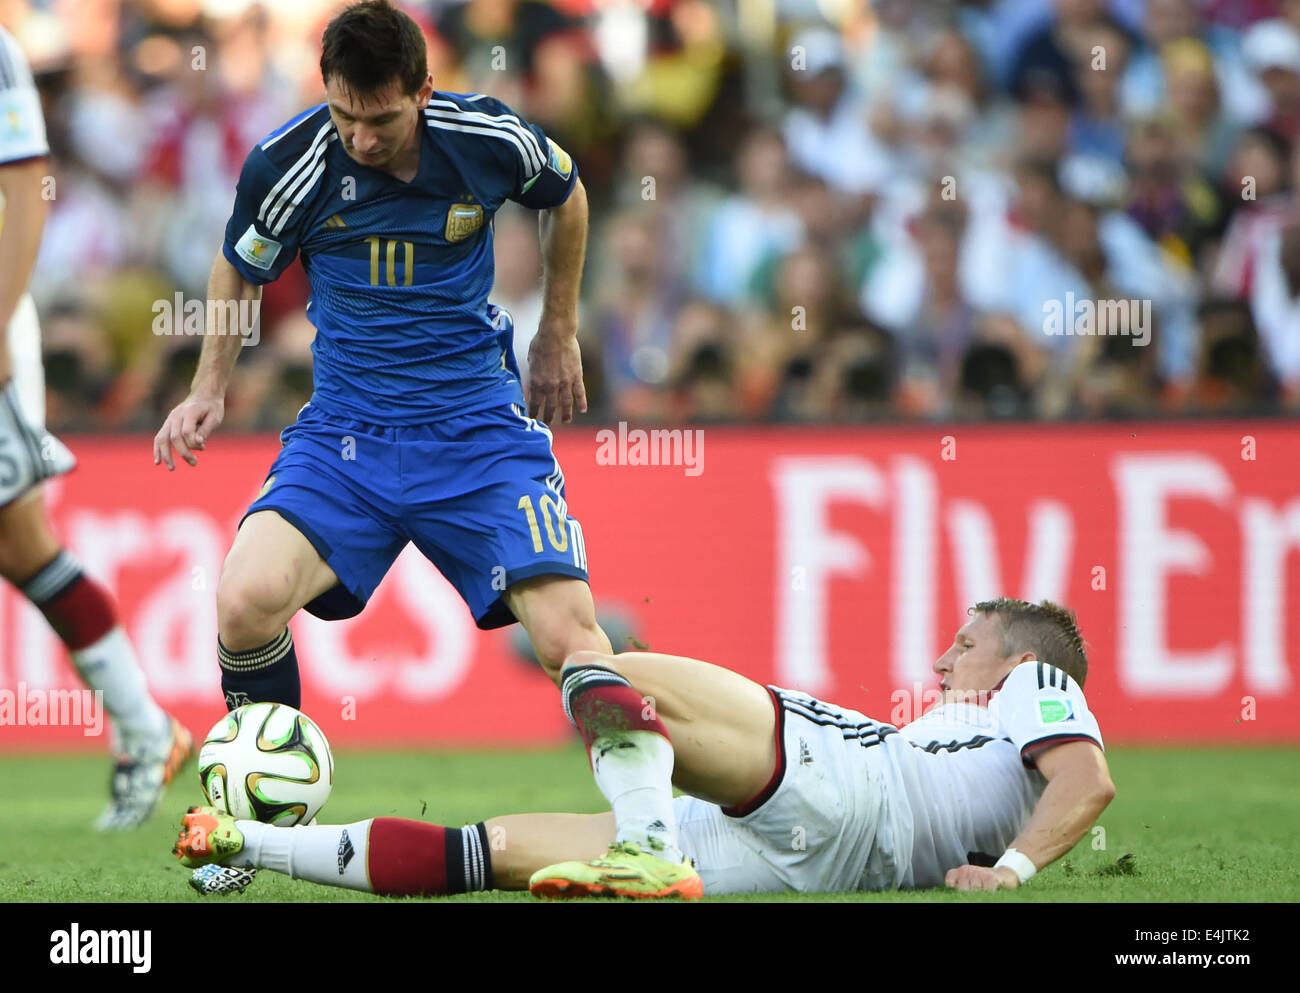 Rio De Janeiro, Brazil. 13th July, 2014. Argentina's Lionel Messi (L) vies with Germany's Bastian Schweinsteiger during the final match between Germany and Argentina of 2014 FIFA World Cup at the Estadio do Maracana Stadium in Rio de Janeiro, Brazil, on July 13, 2014. Credit:  Guo Yong/Xinhua/Alamy Live News Stock Photo